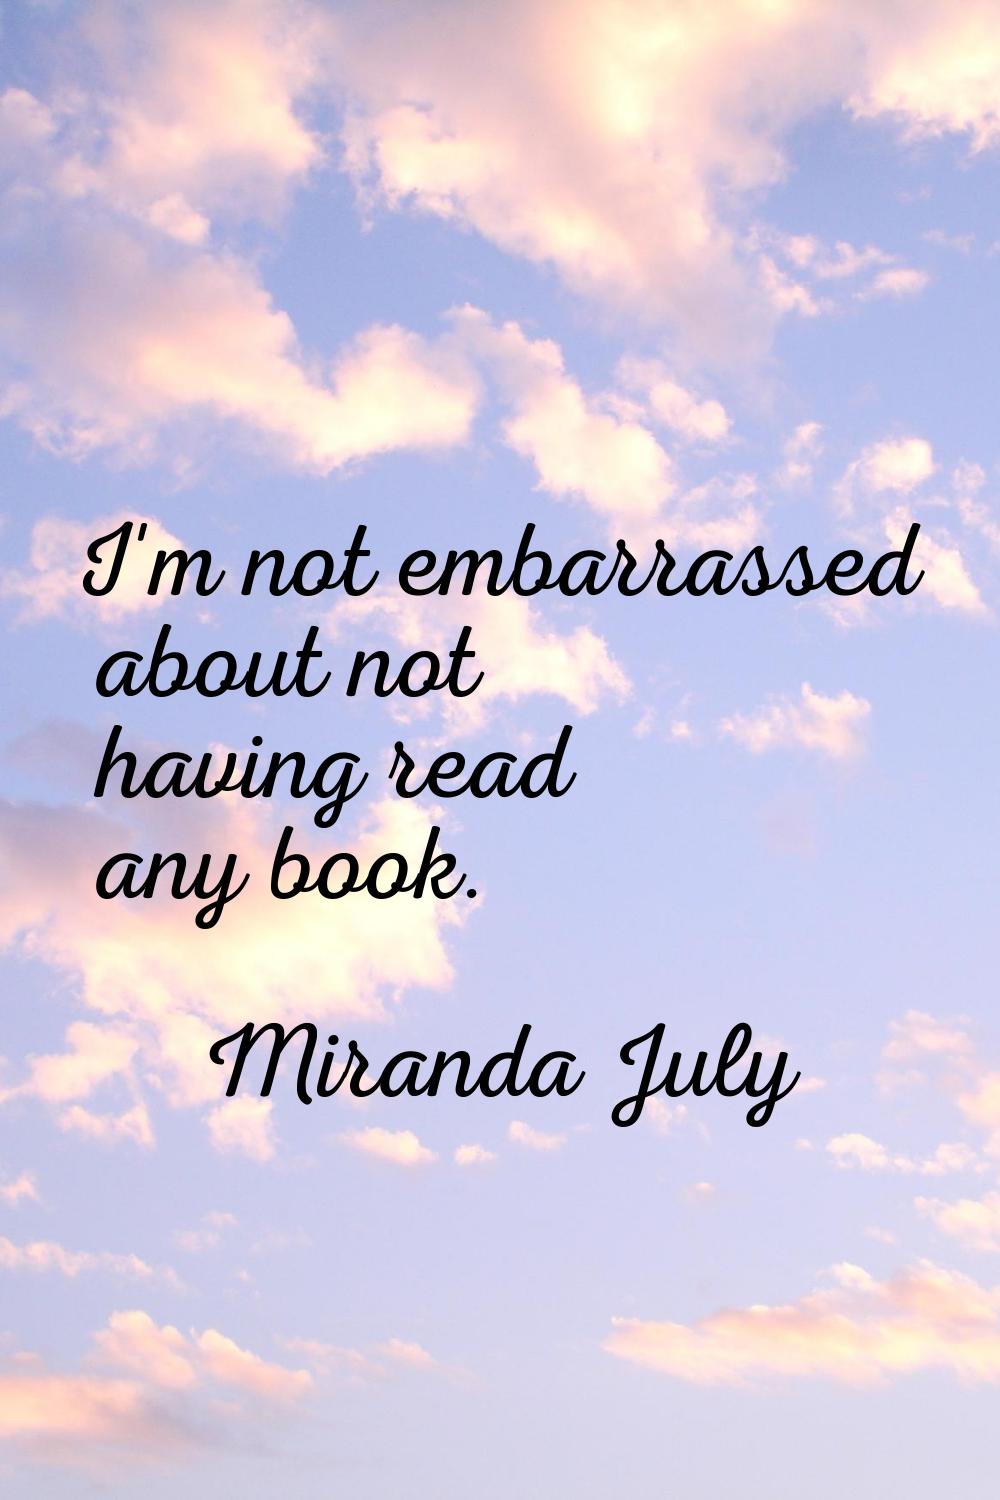 I'm not embarrassed about not having read any book.